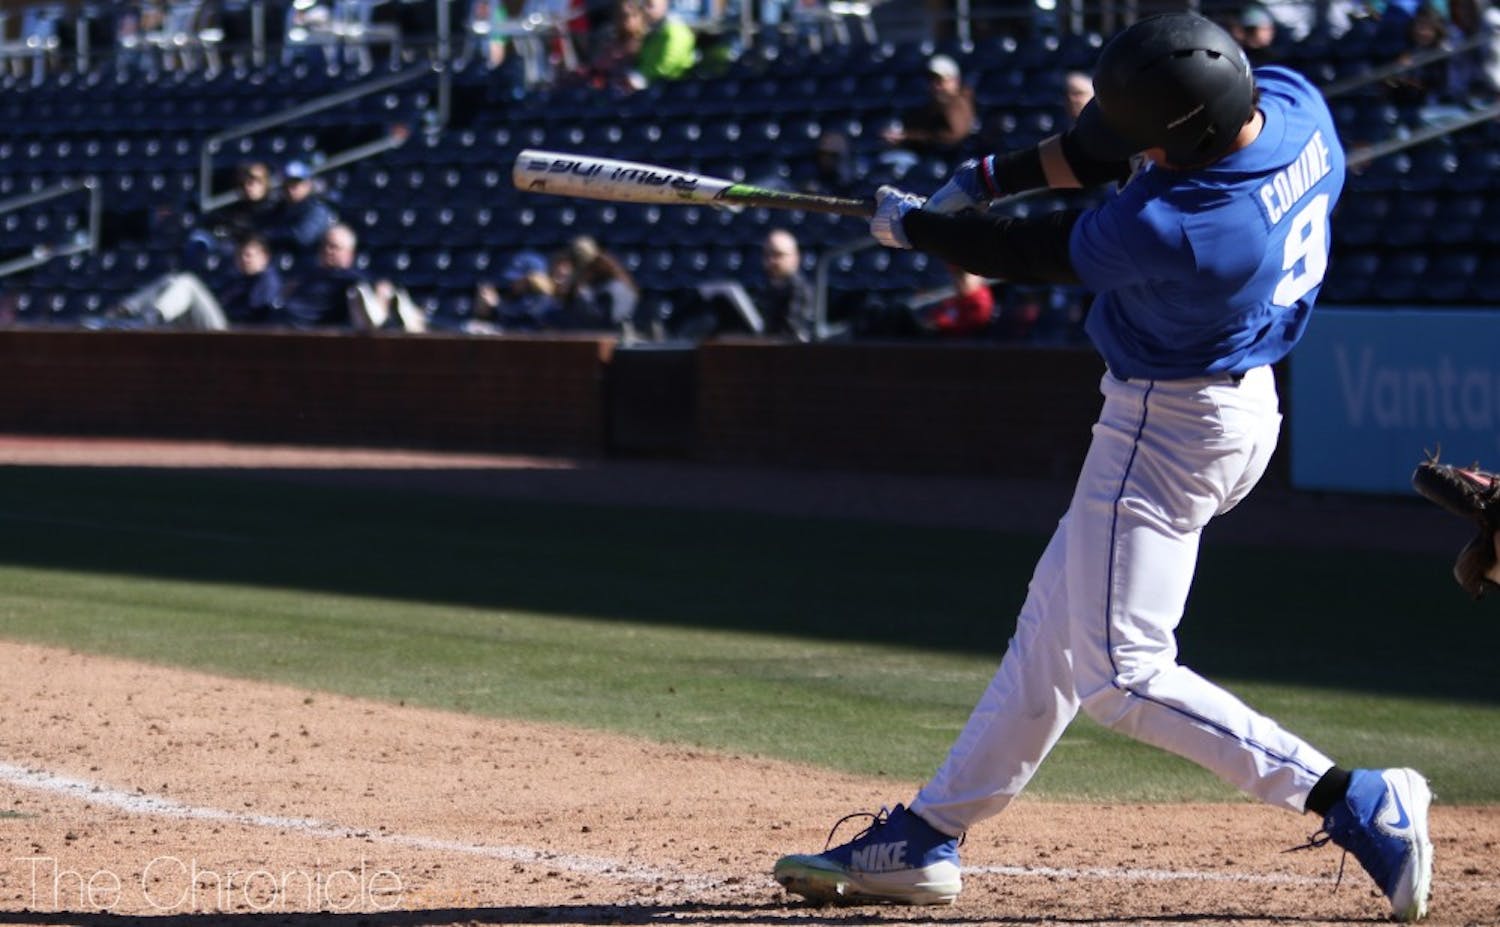 Griffin Conine blasted three home runs in the Blue Devils' doubleheader sweep Monday.